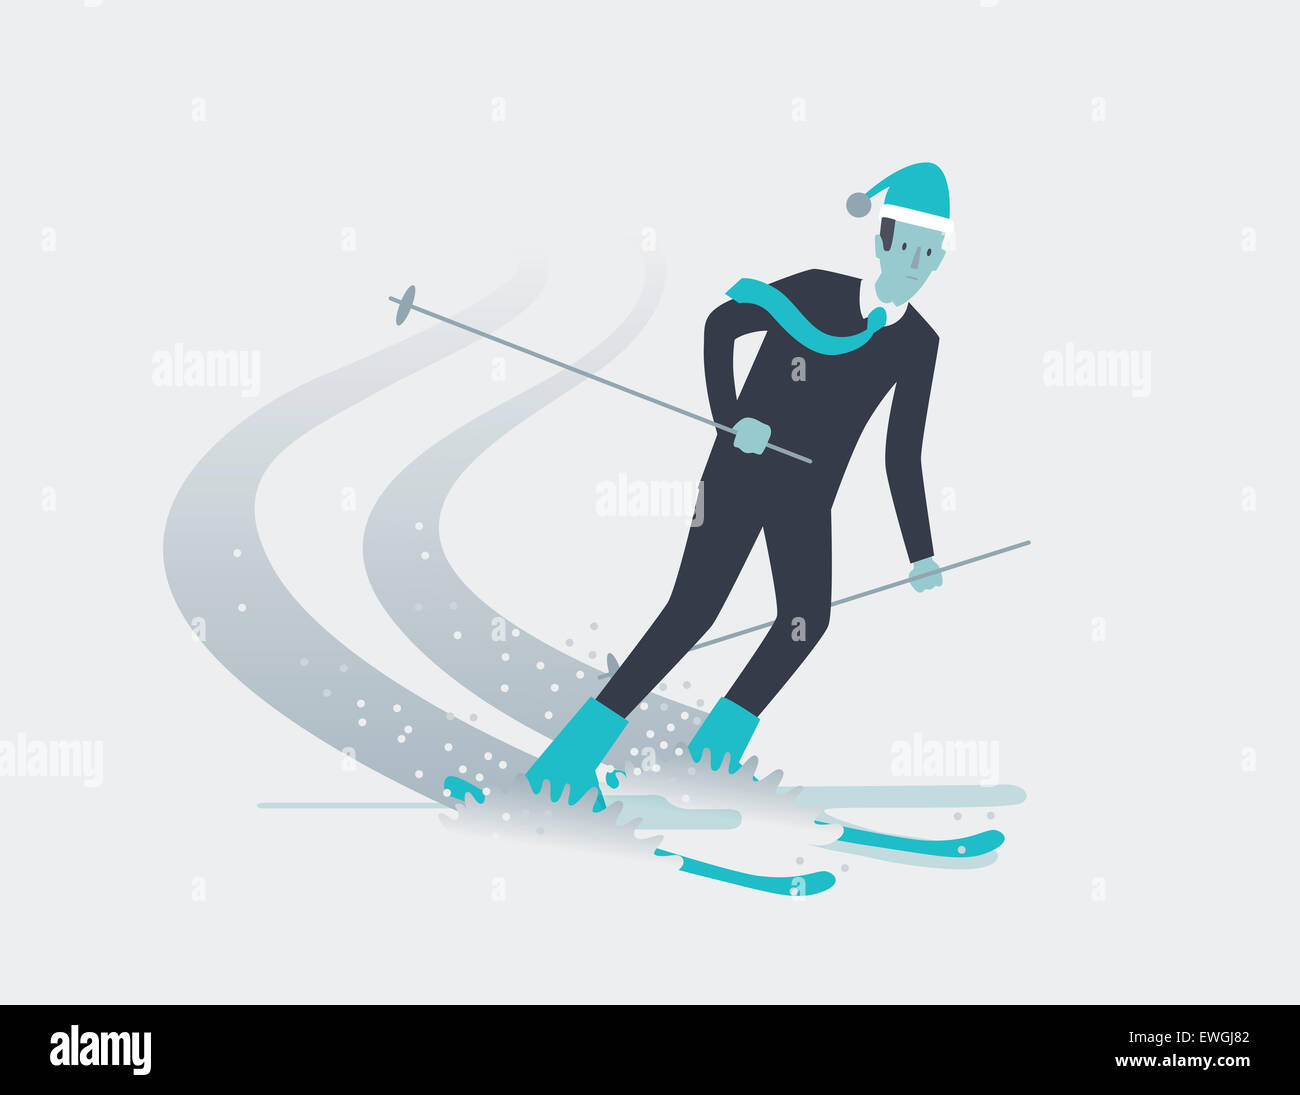 Businessman on exciting holiday skiing on snow hill Stock Photo